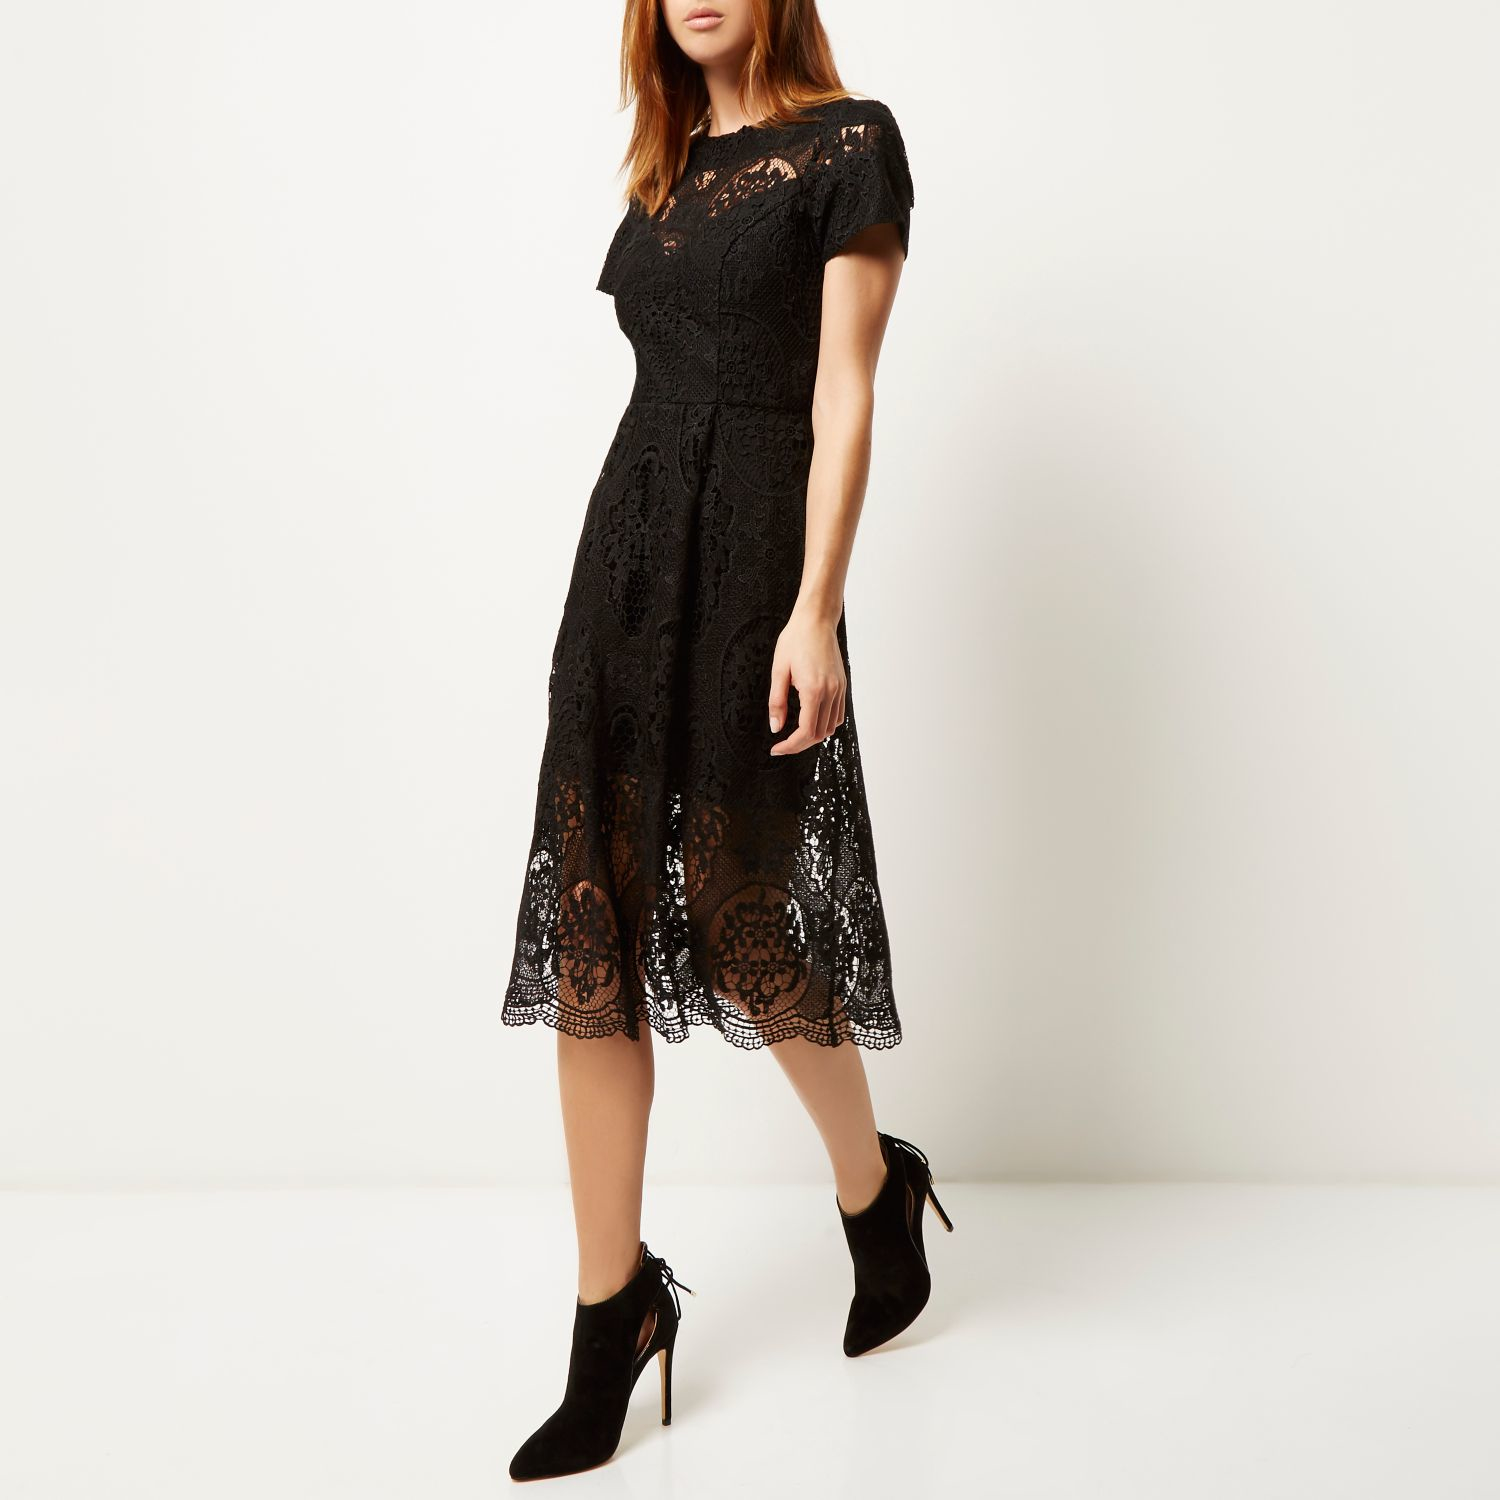 White Lace Dress River Island : How To Get Attention